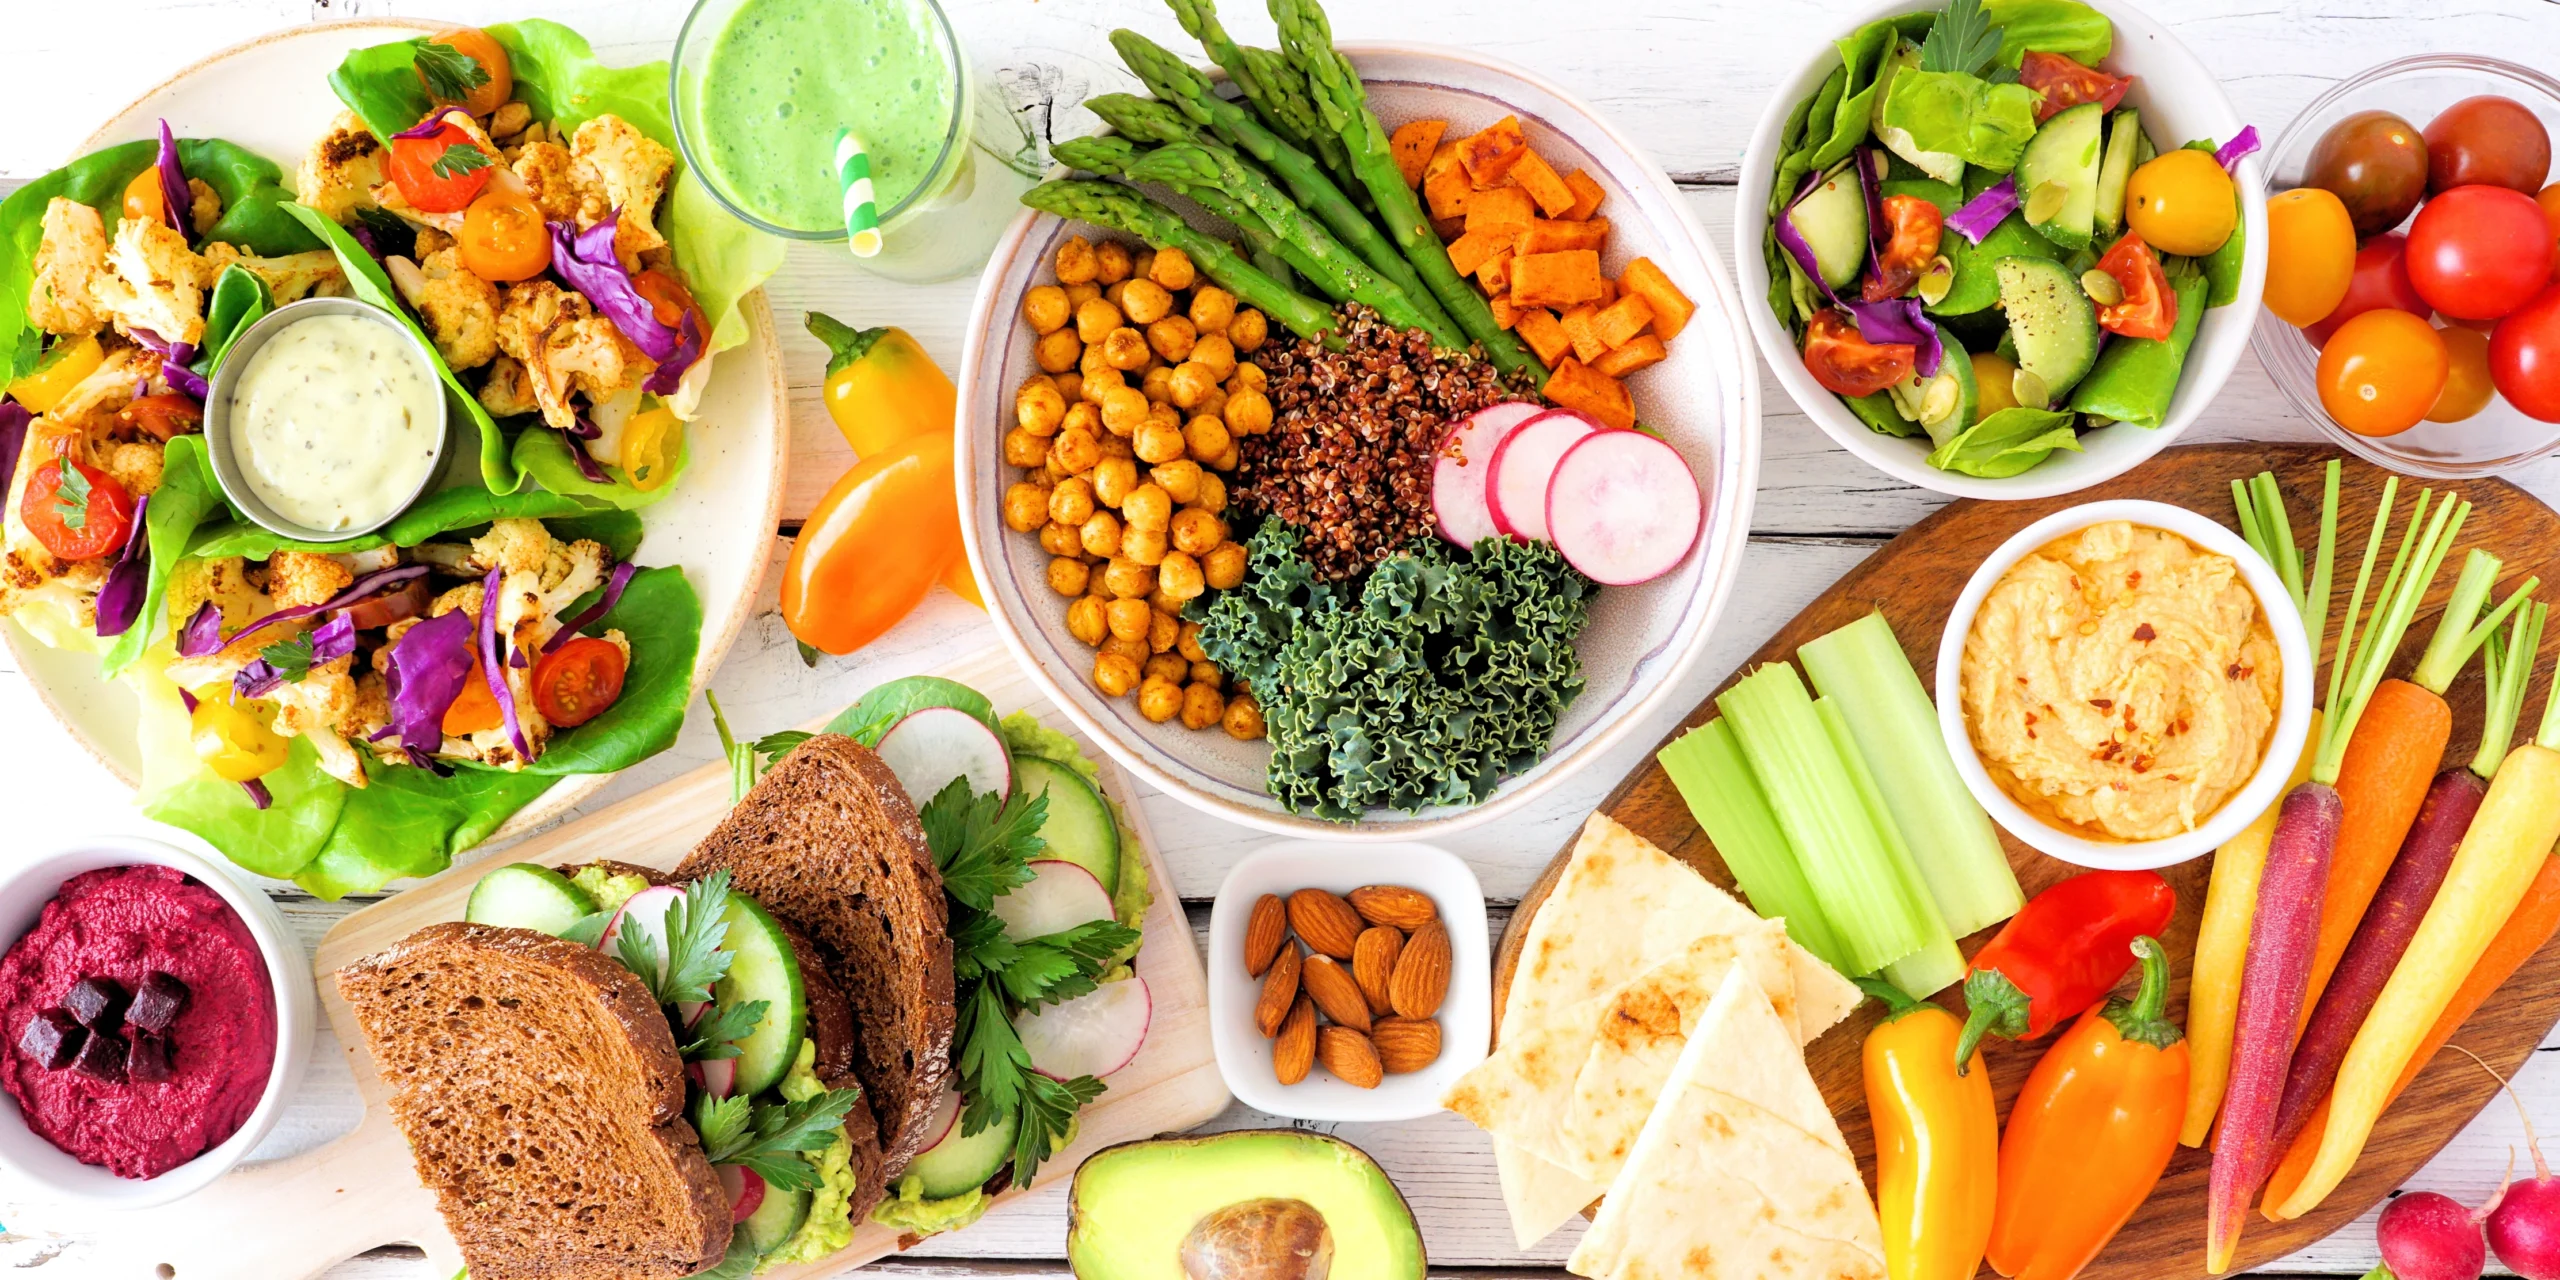 Platters and bowls of plant-based foods are shown from above on a white-washed table. They include salads, vegetarian sandwiches, and dips.